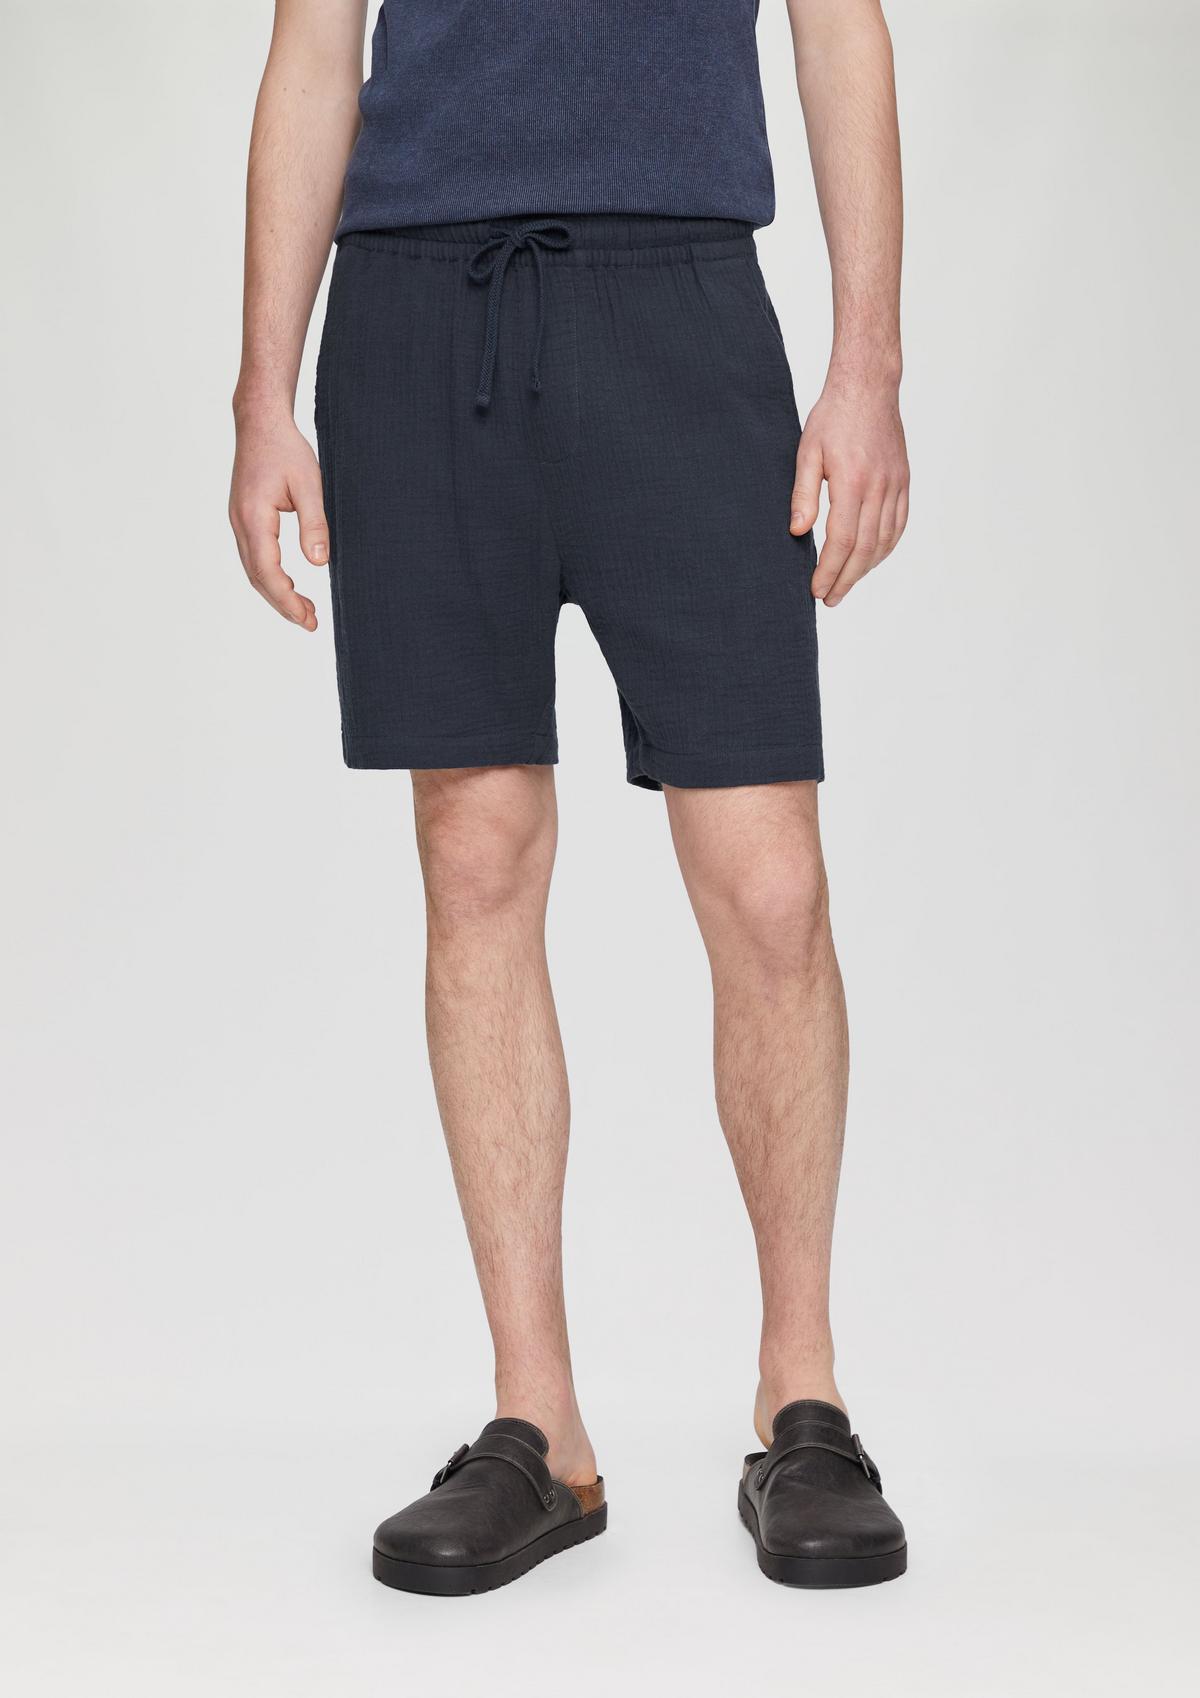 s.Oliver Shorts with an elasticated drawstring waistband